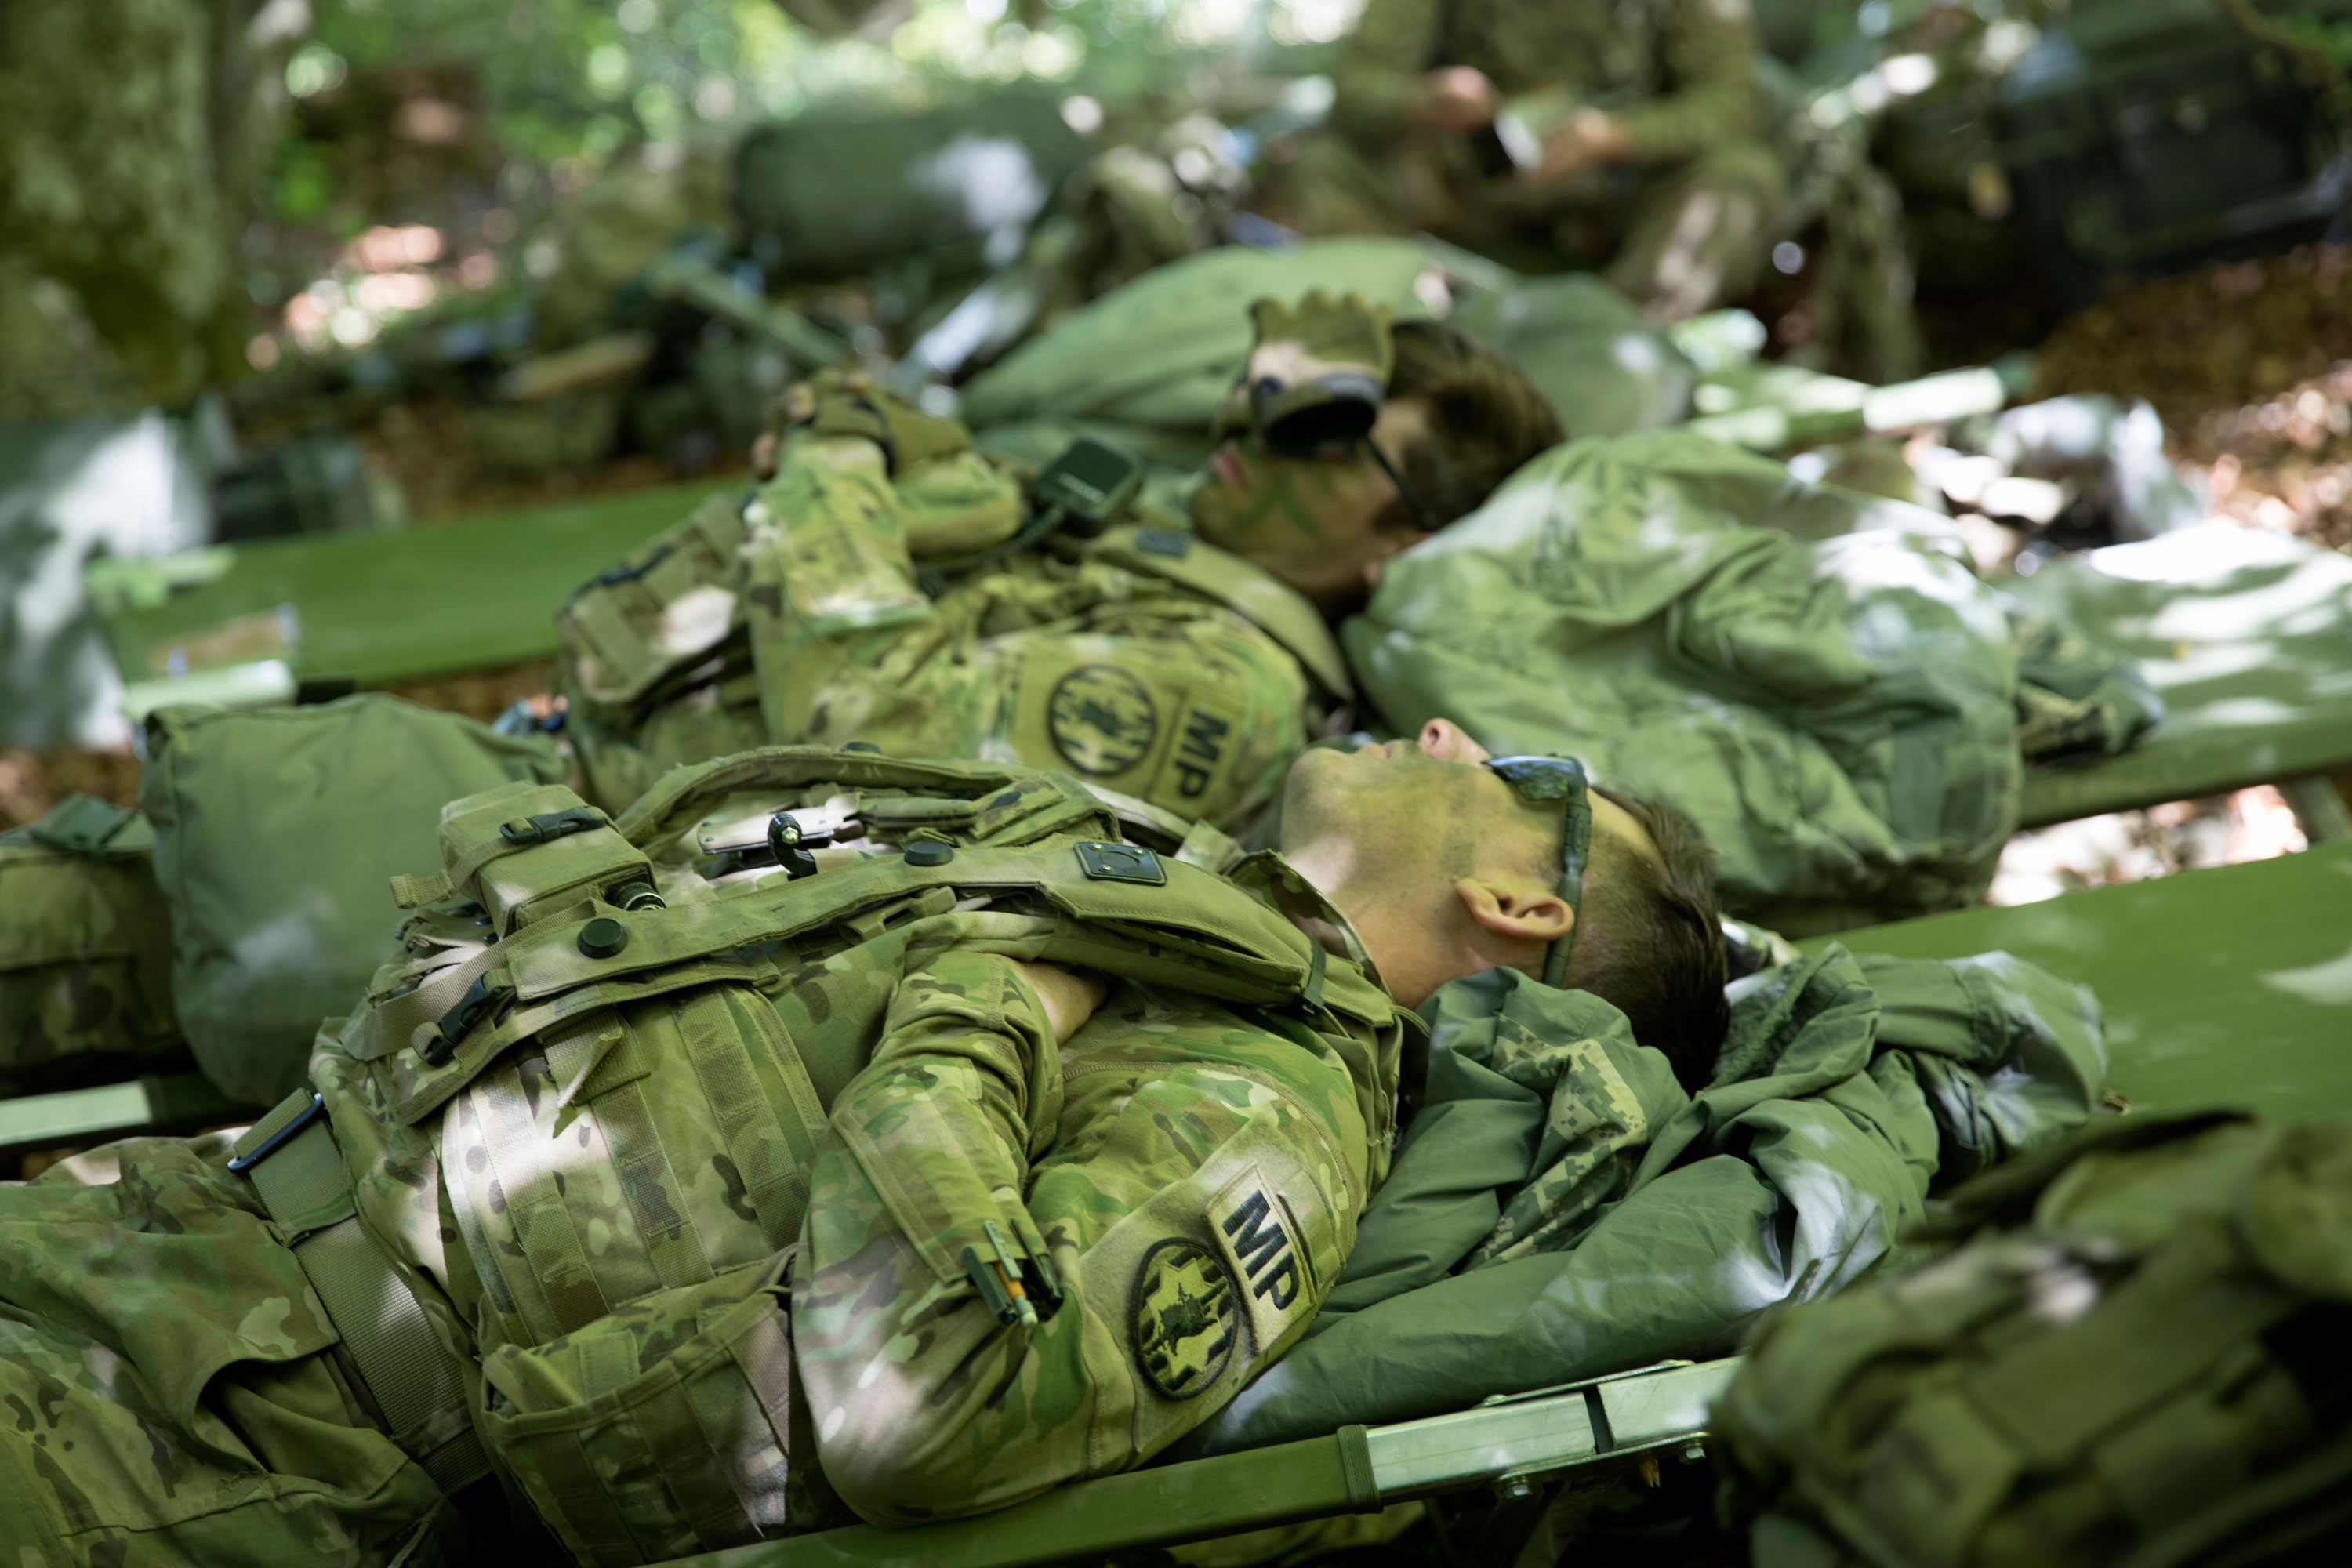 Veterans Have Higher Rates of Insomnia Than Non-Veterans